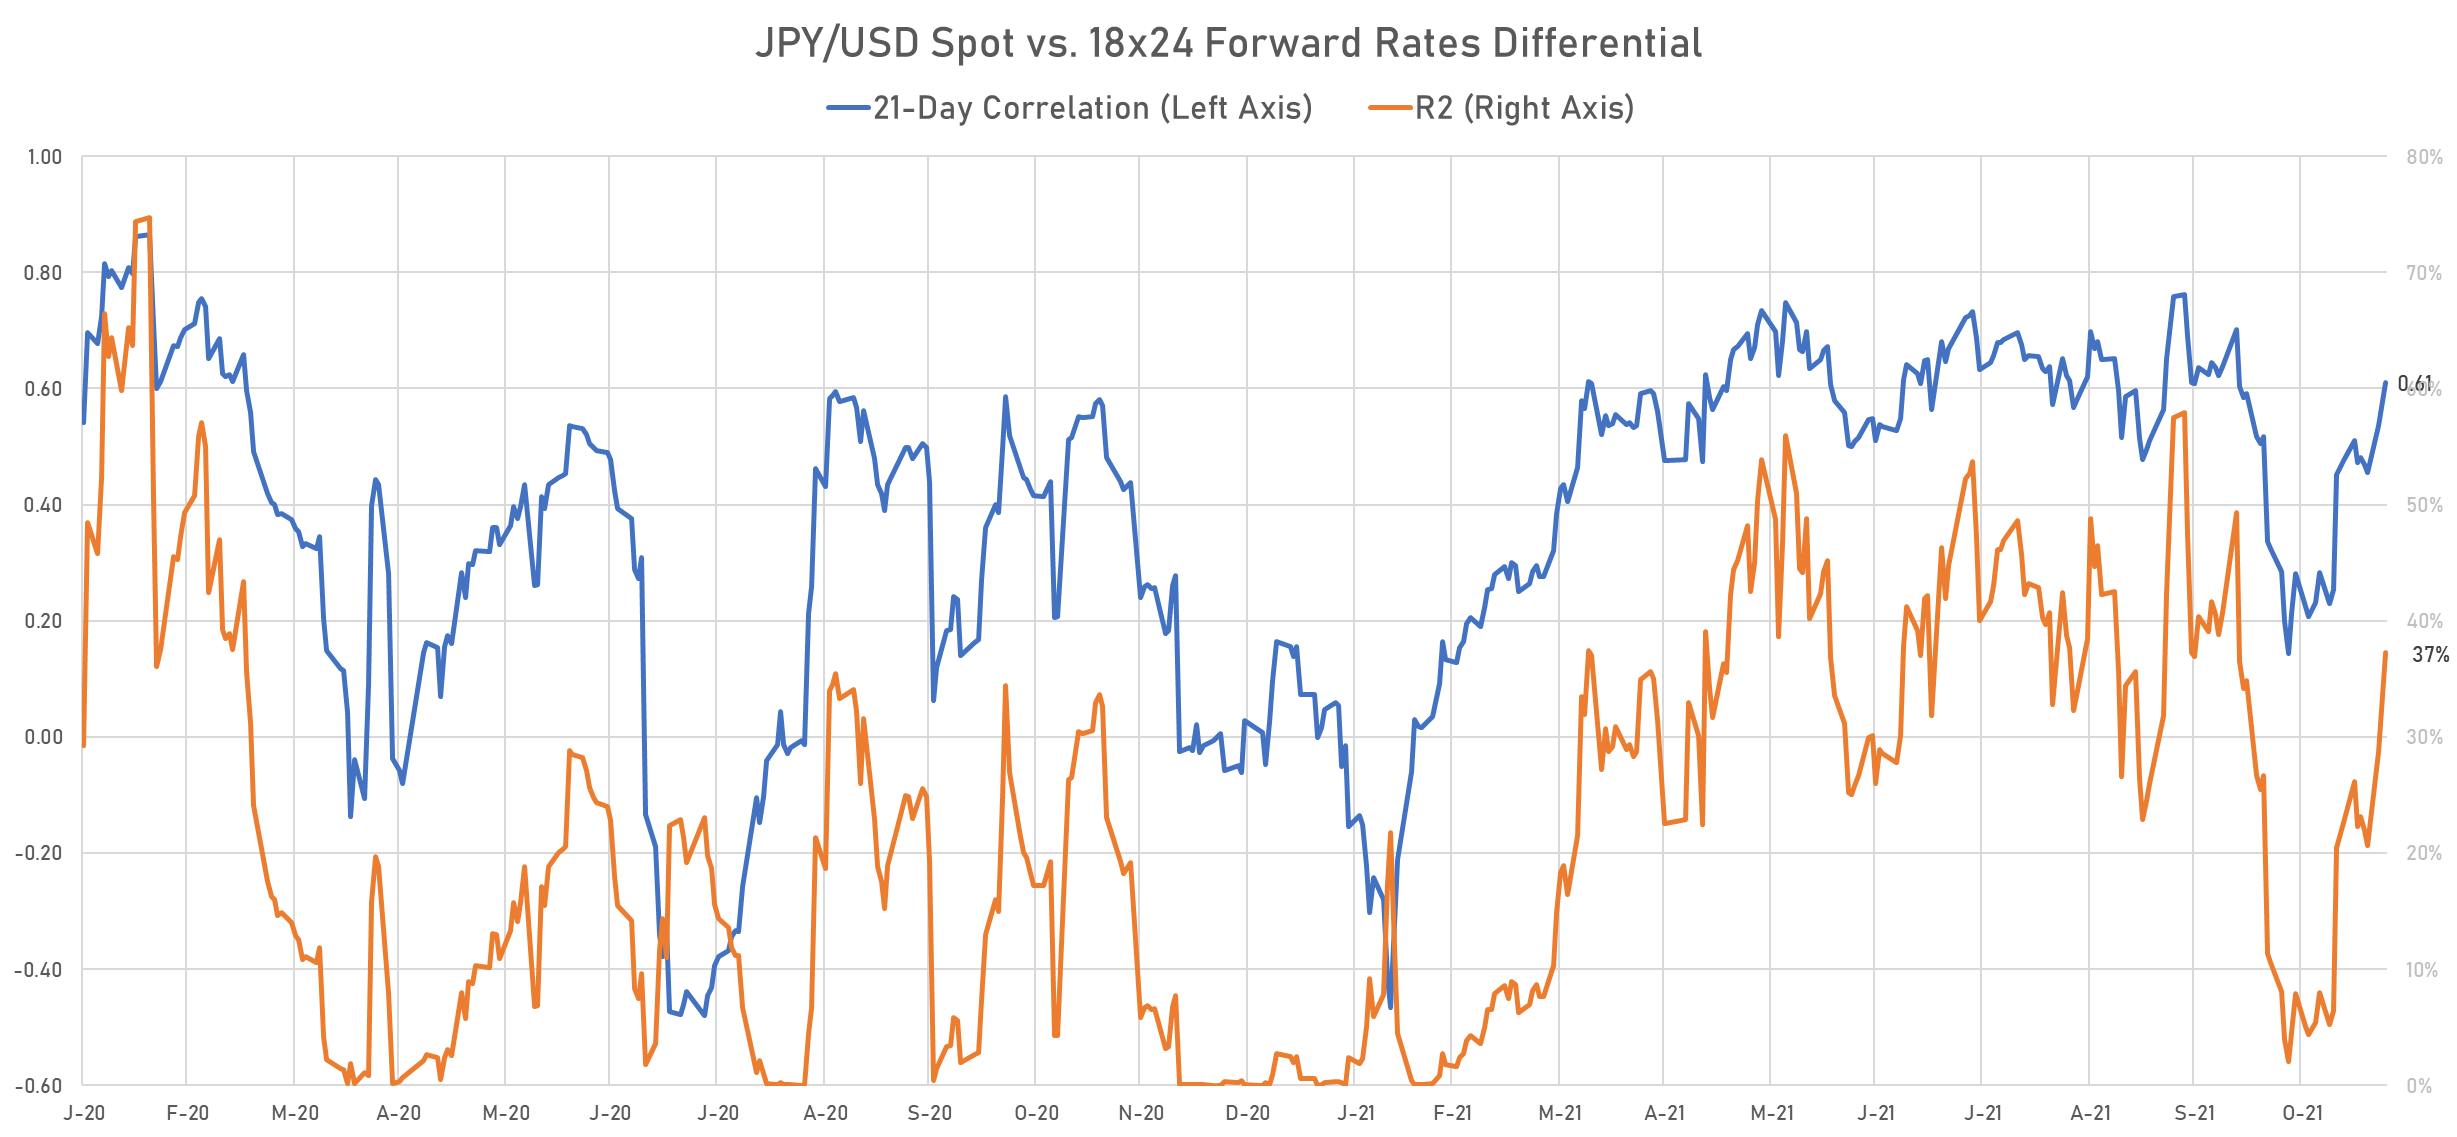 JPY/USD Spot Rate Correlation WIth 18x24 Rates Differential | Sources: phipost.com, Refinitiv data